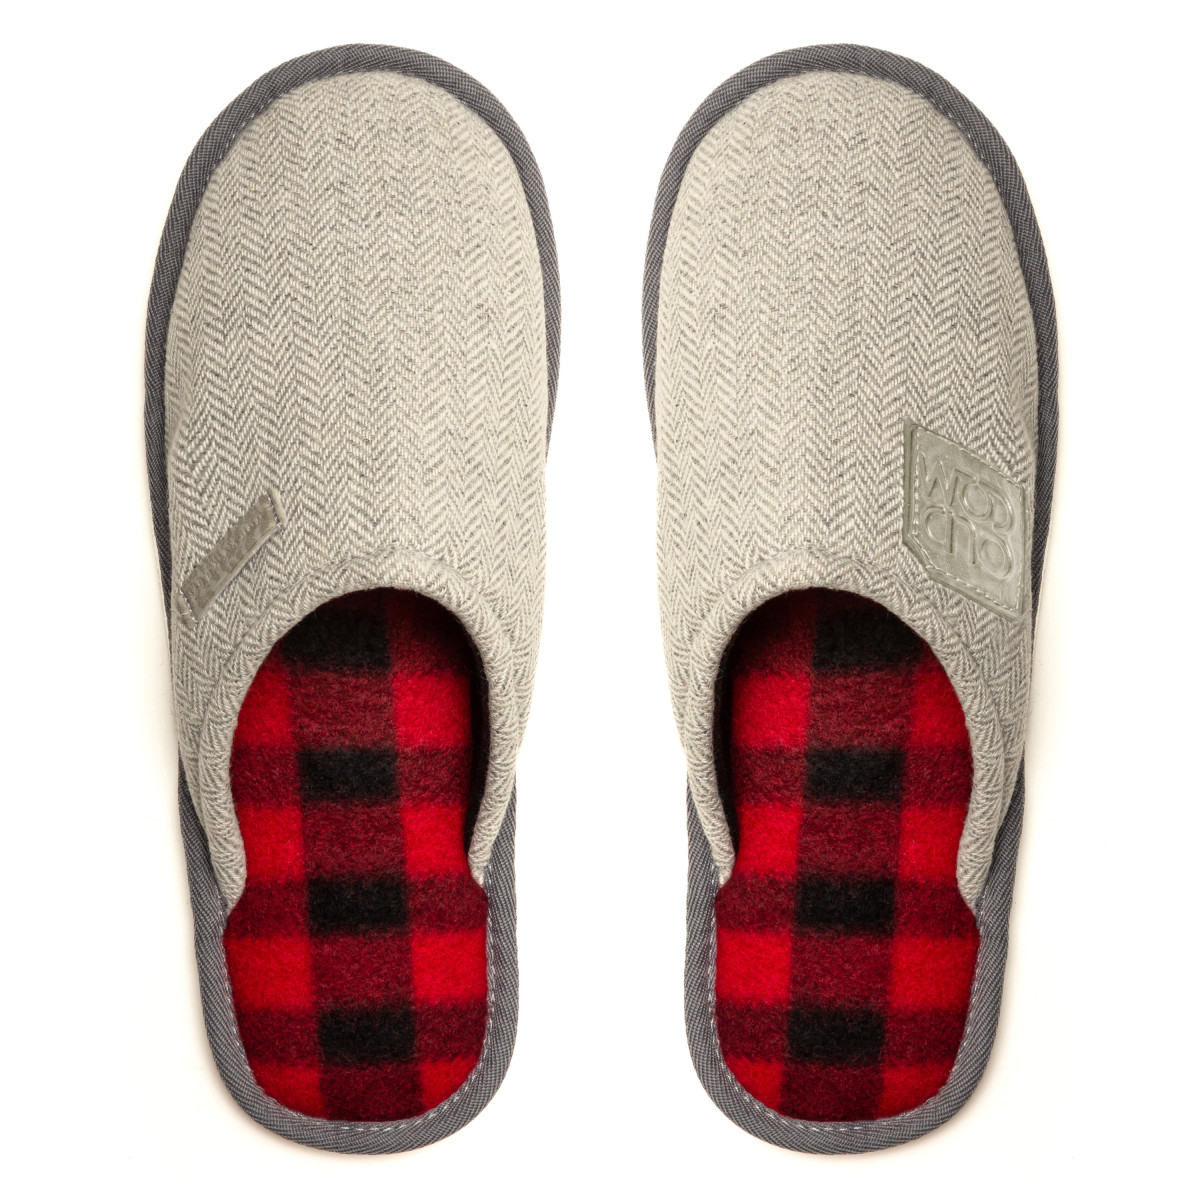 Home slippers LUX HOME, Gray